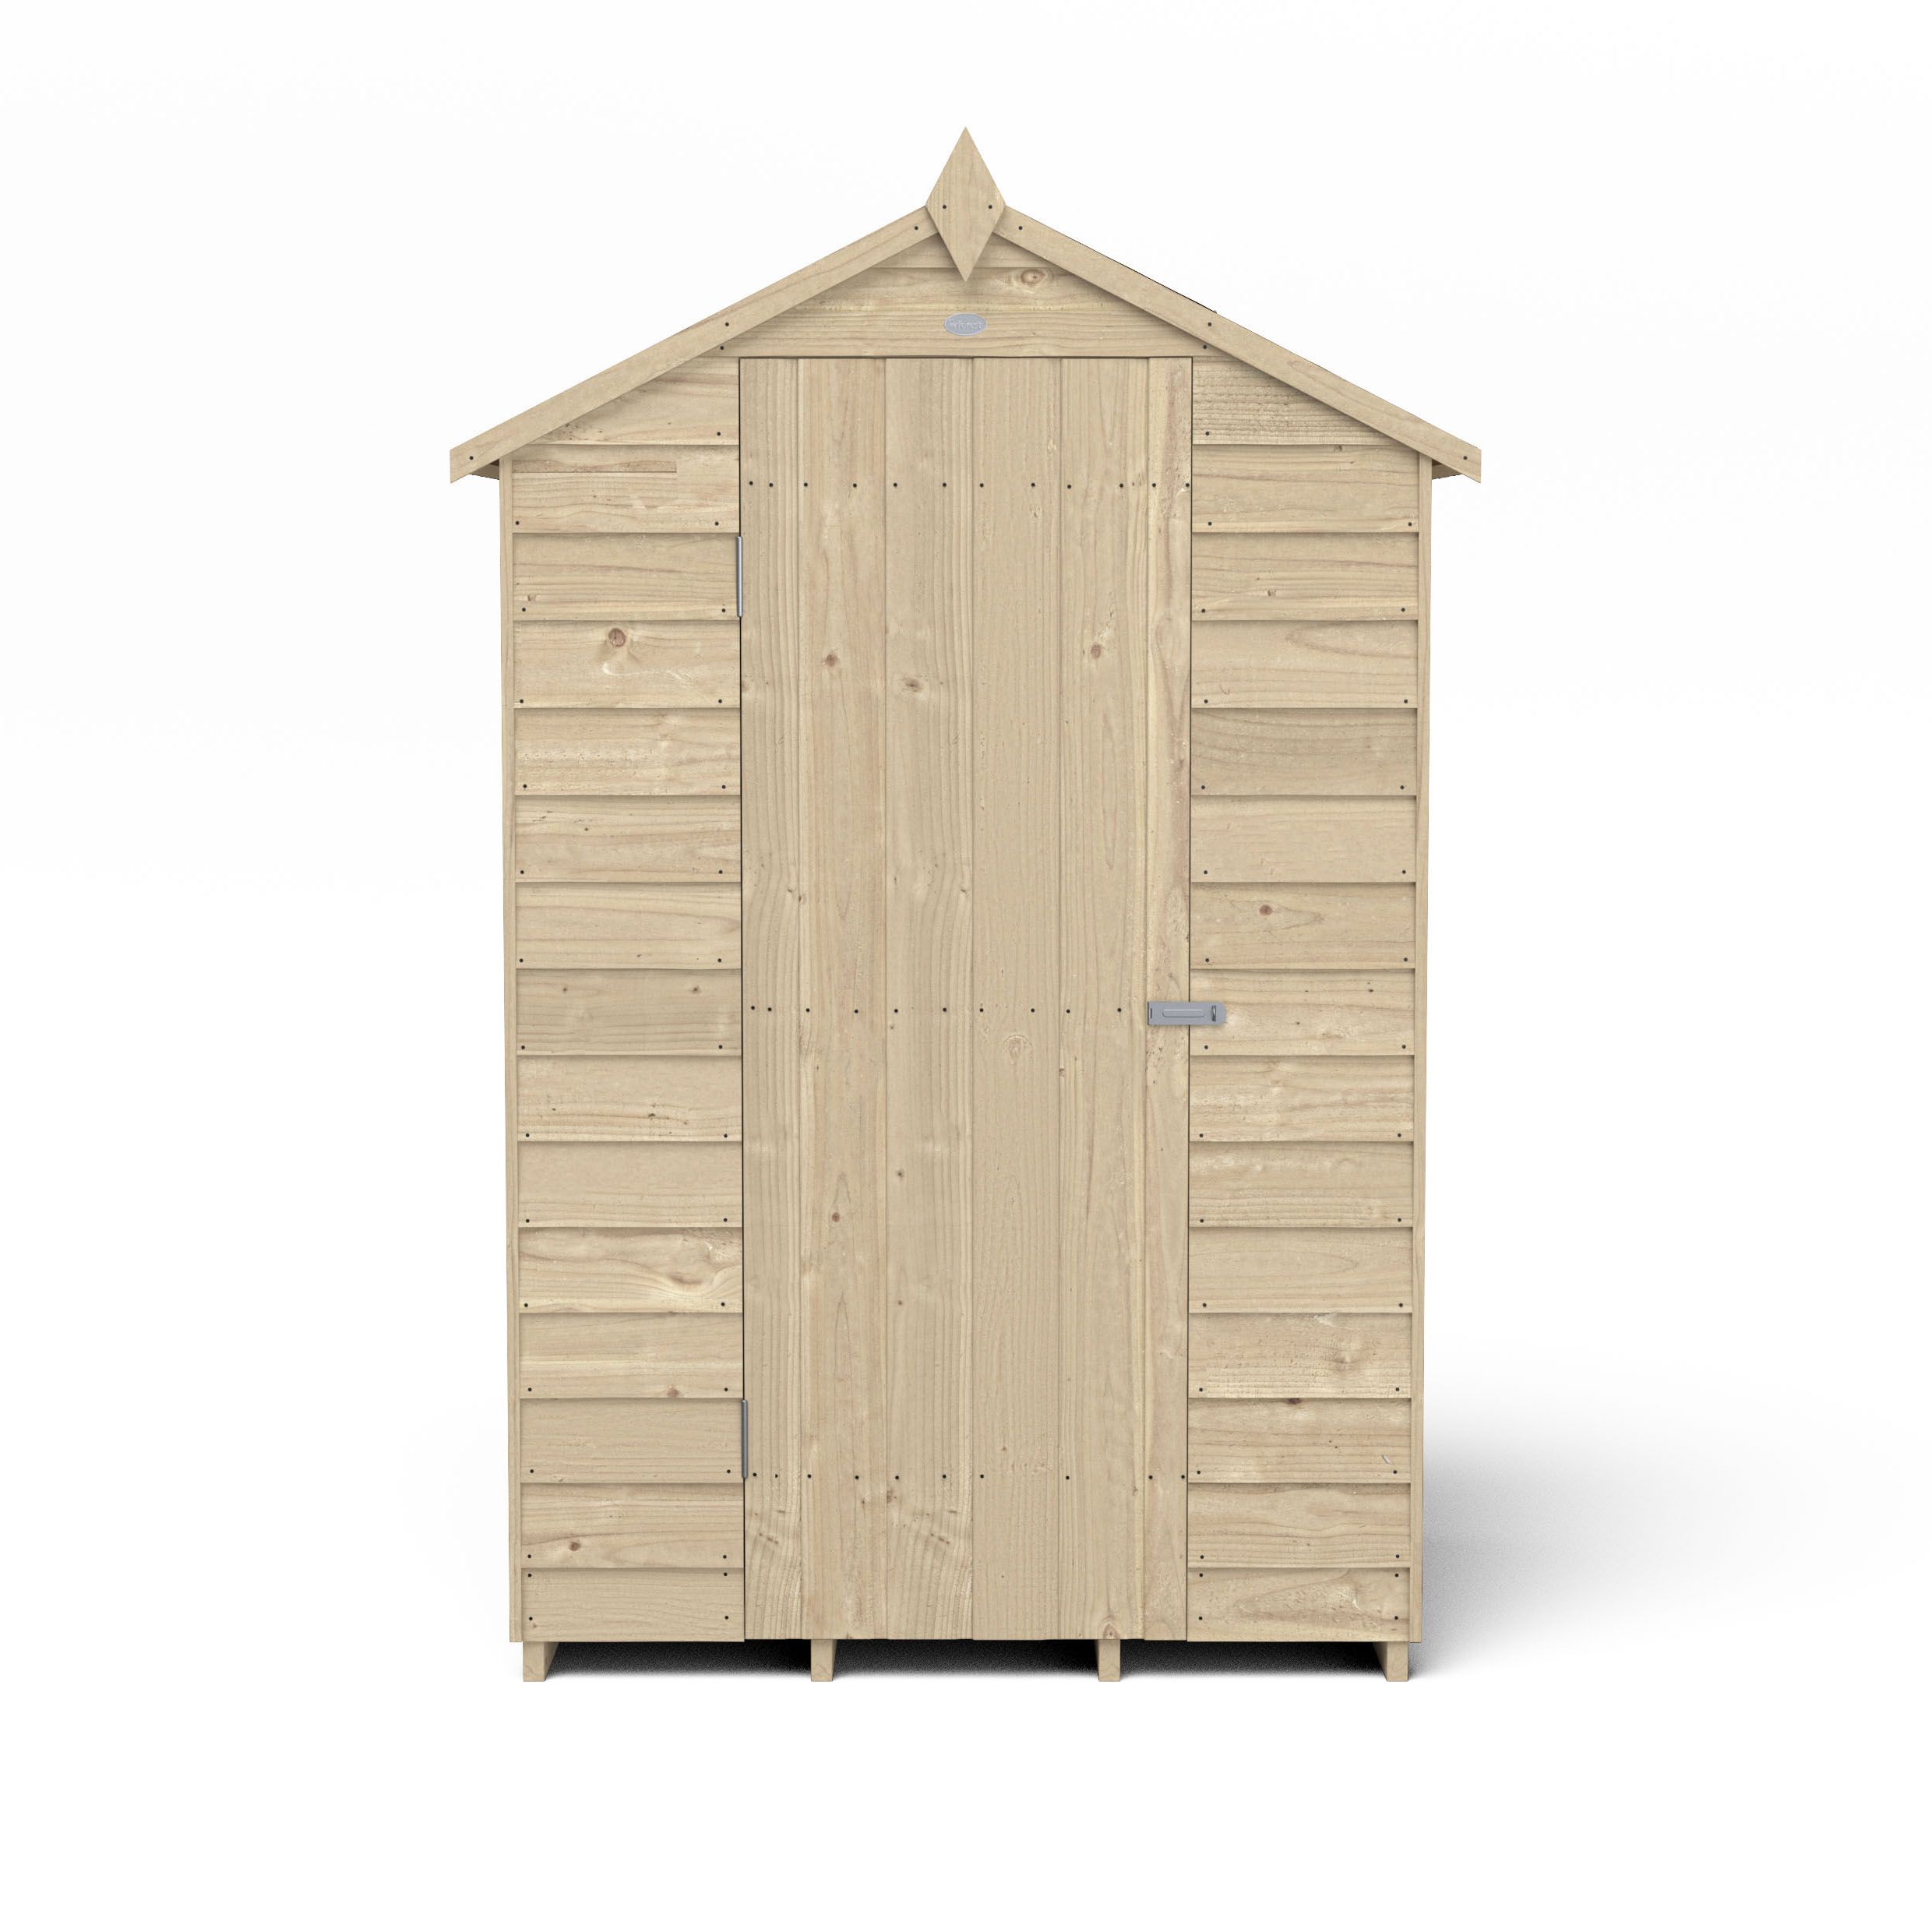 Forest Garden Overlap 4x3 ft Apex Wooden Pressure treated Shed with floor (Base included) - Assembly service included